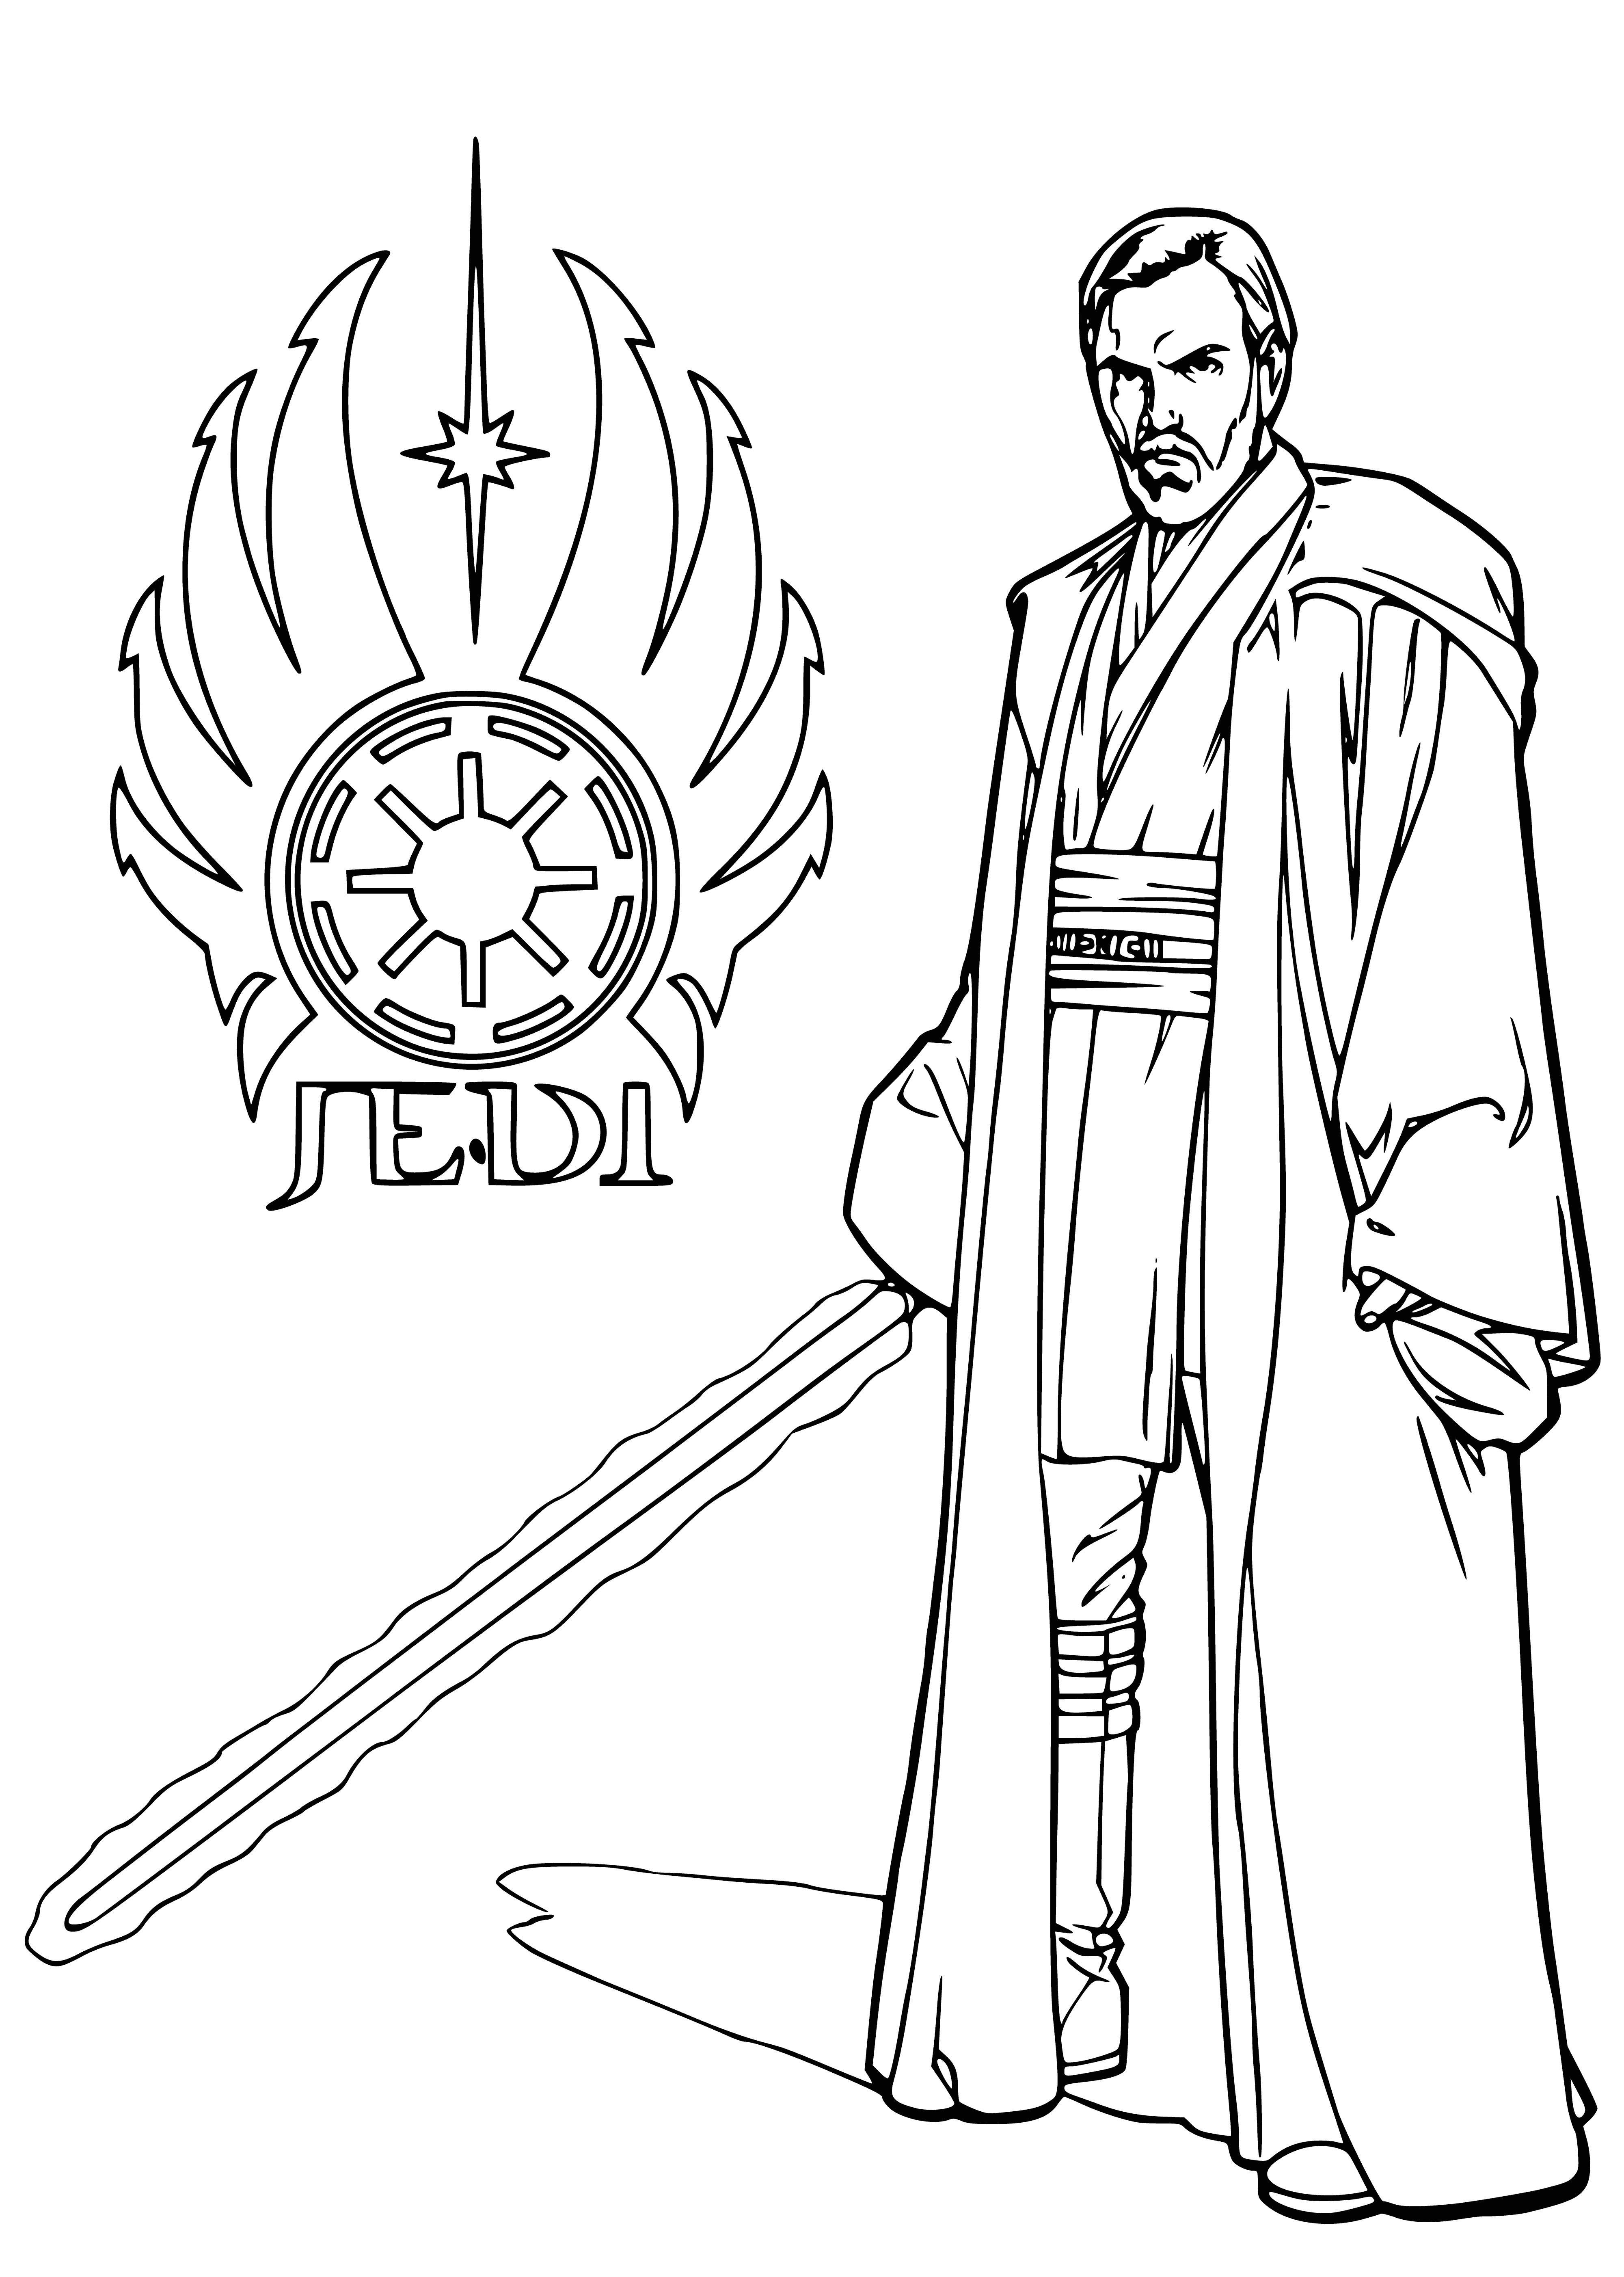 coloring page: Jedi Knight Obi-Wan Kenobi stands on a ship in space, surrounded by clone troopers, lightsaber in hand and prepared for battle.